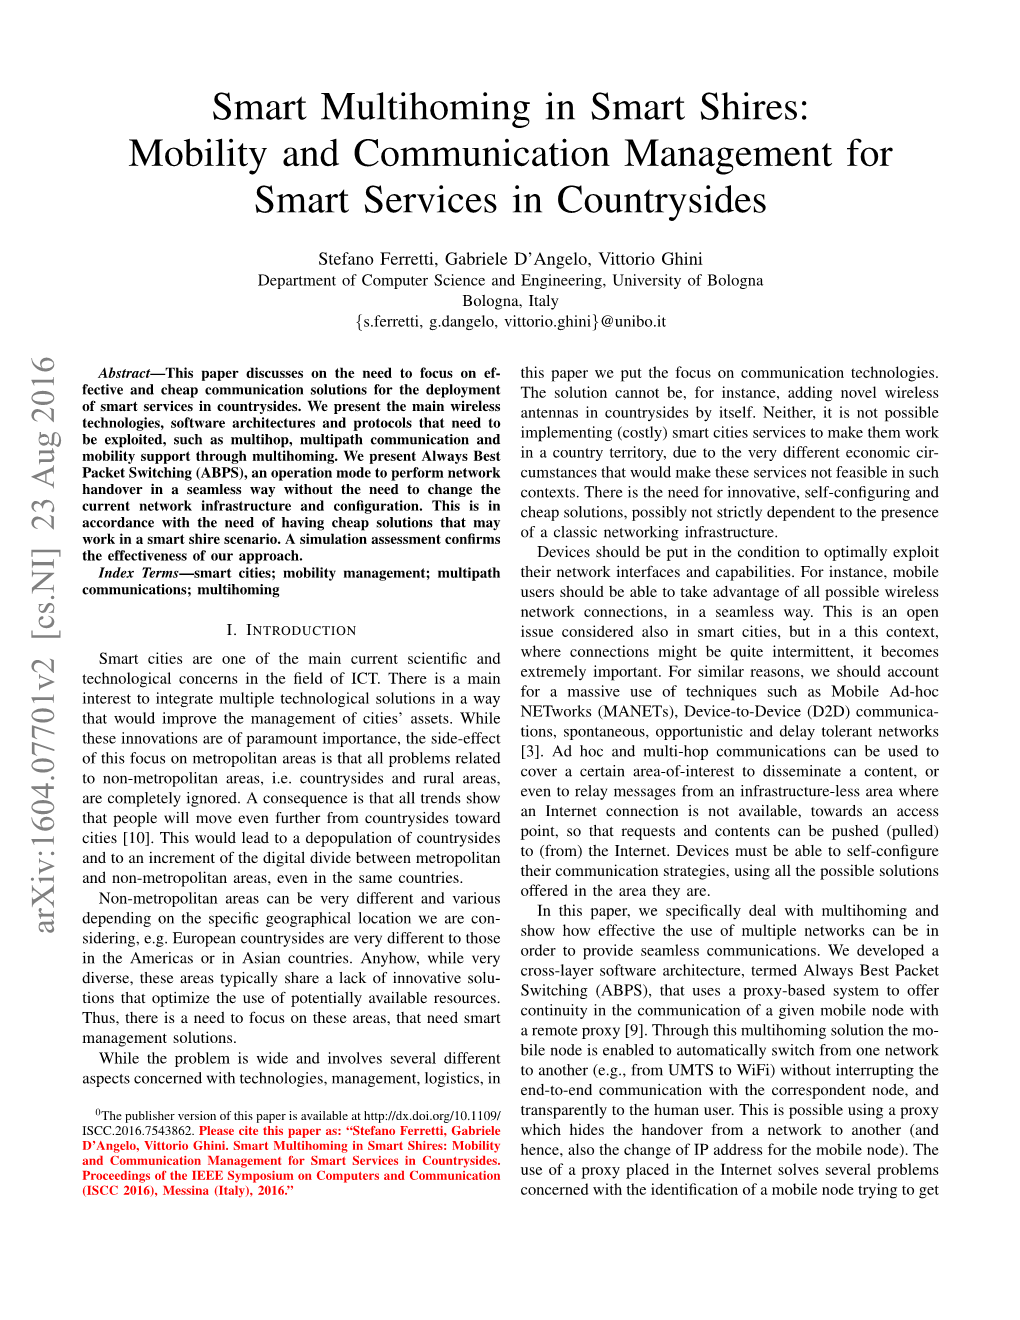 Smart Multihoming in Smart Shires: Mobility and Communication Management for Smart Services in Countrysides